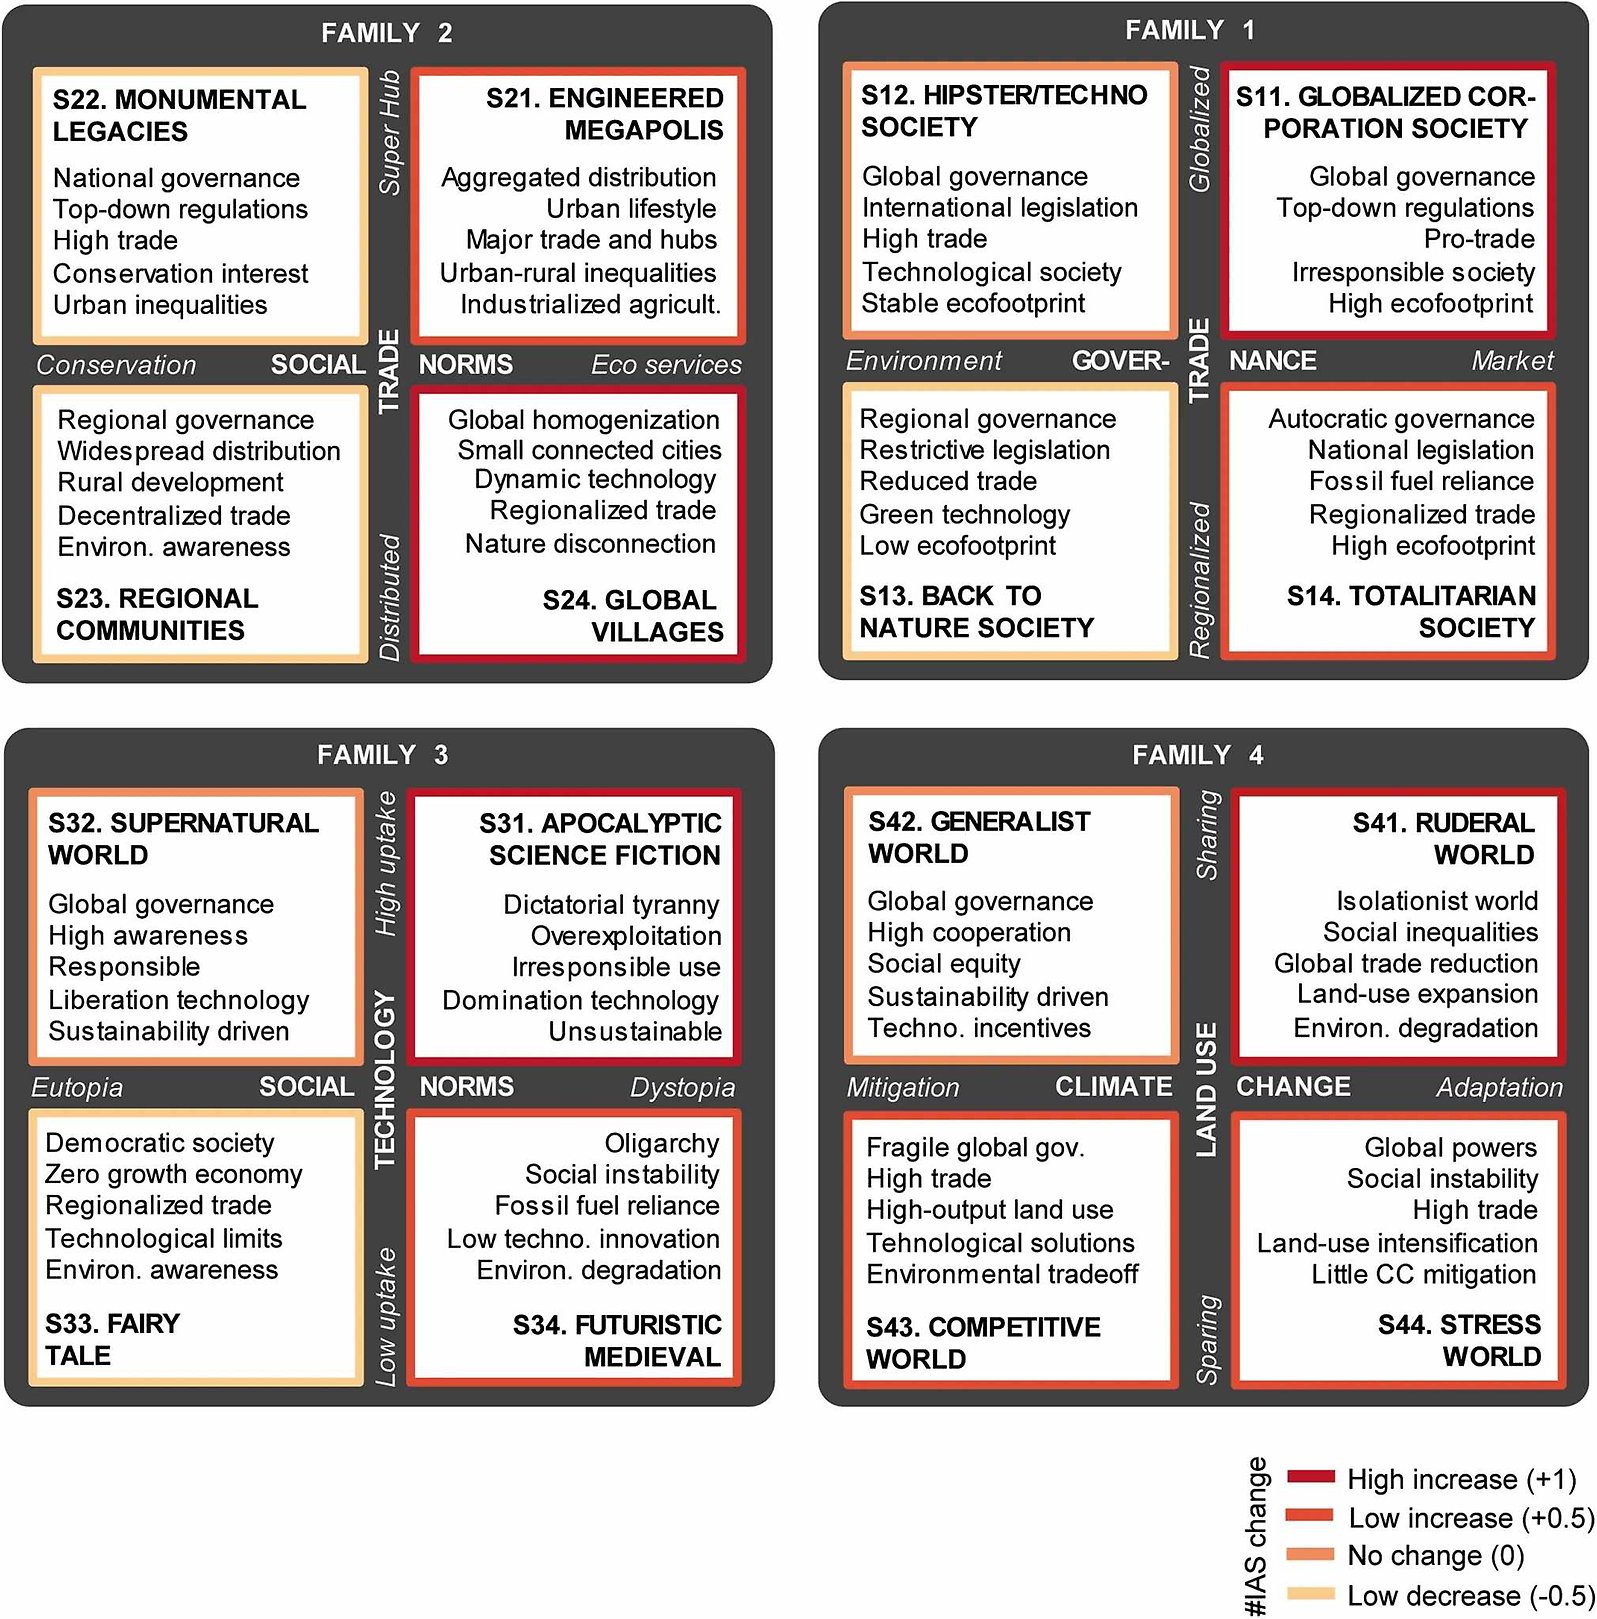 Figure from the paper showing the 16 scenarios for biological invasions.